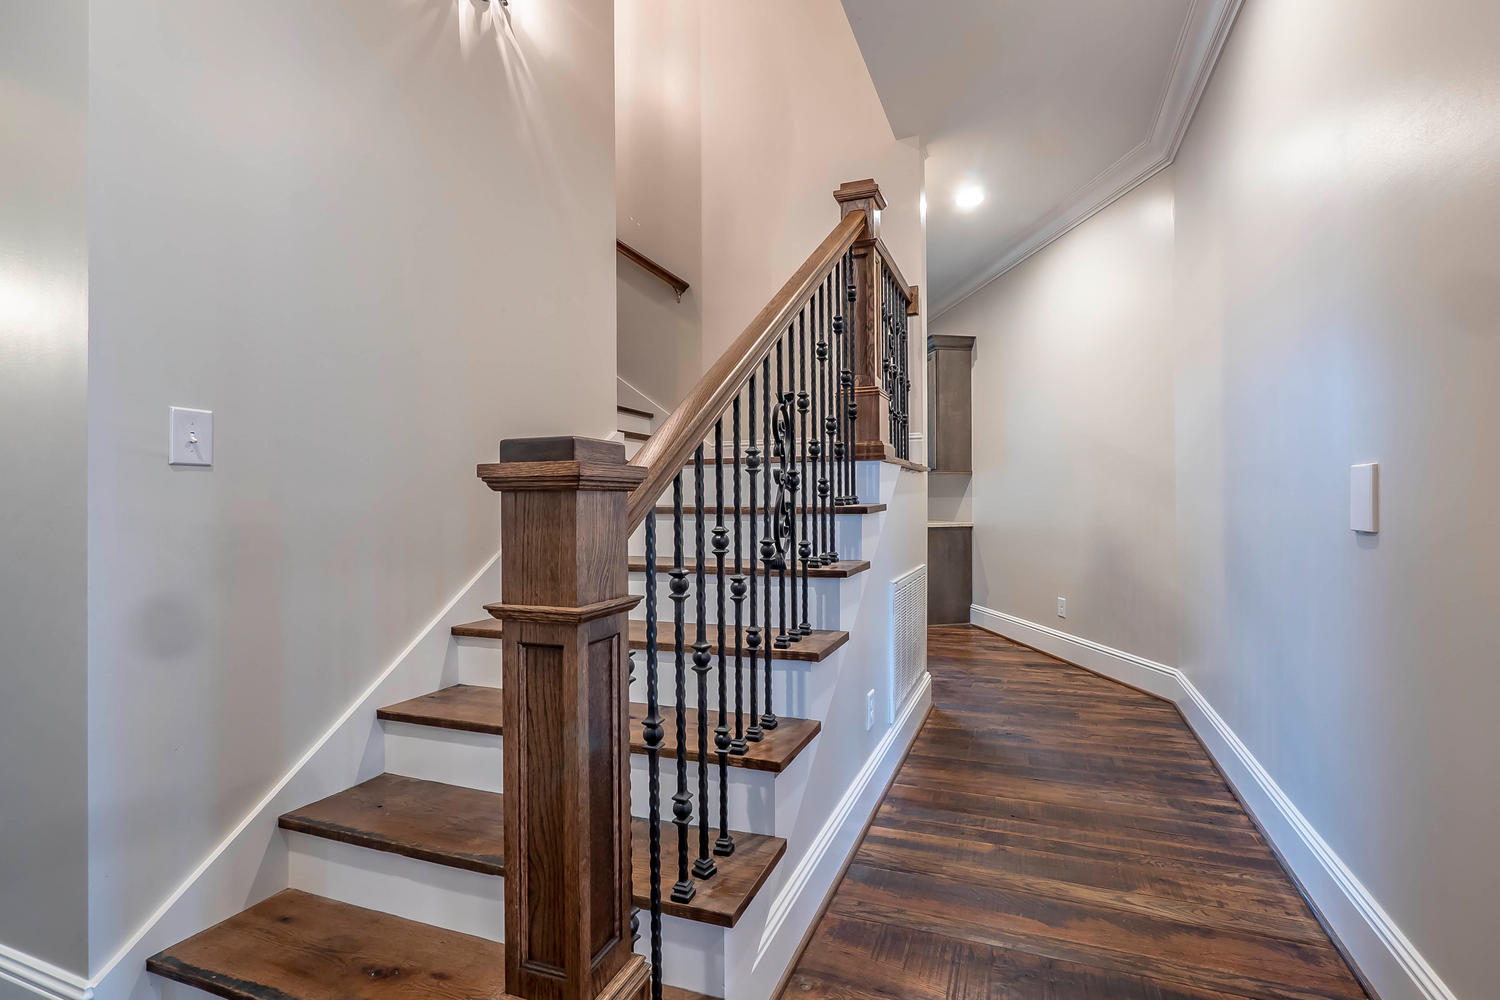 Wrought Iron balusters